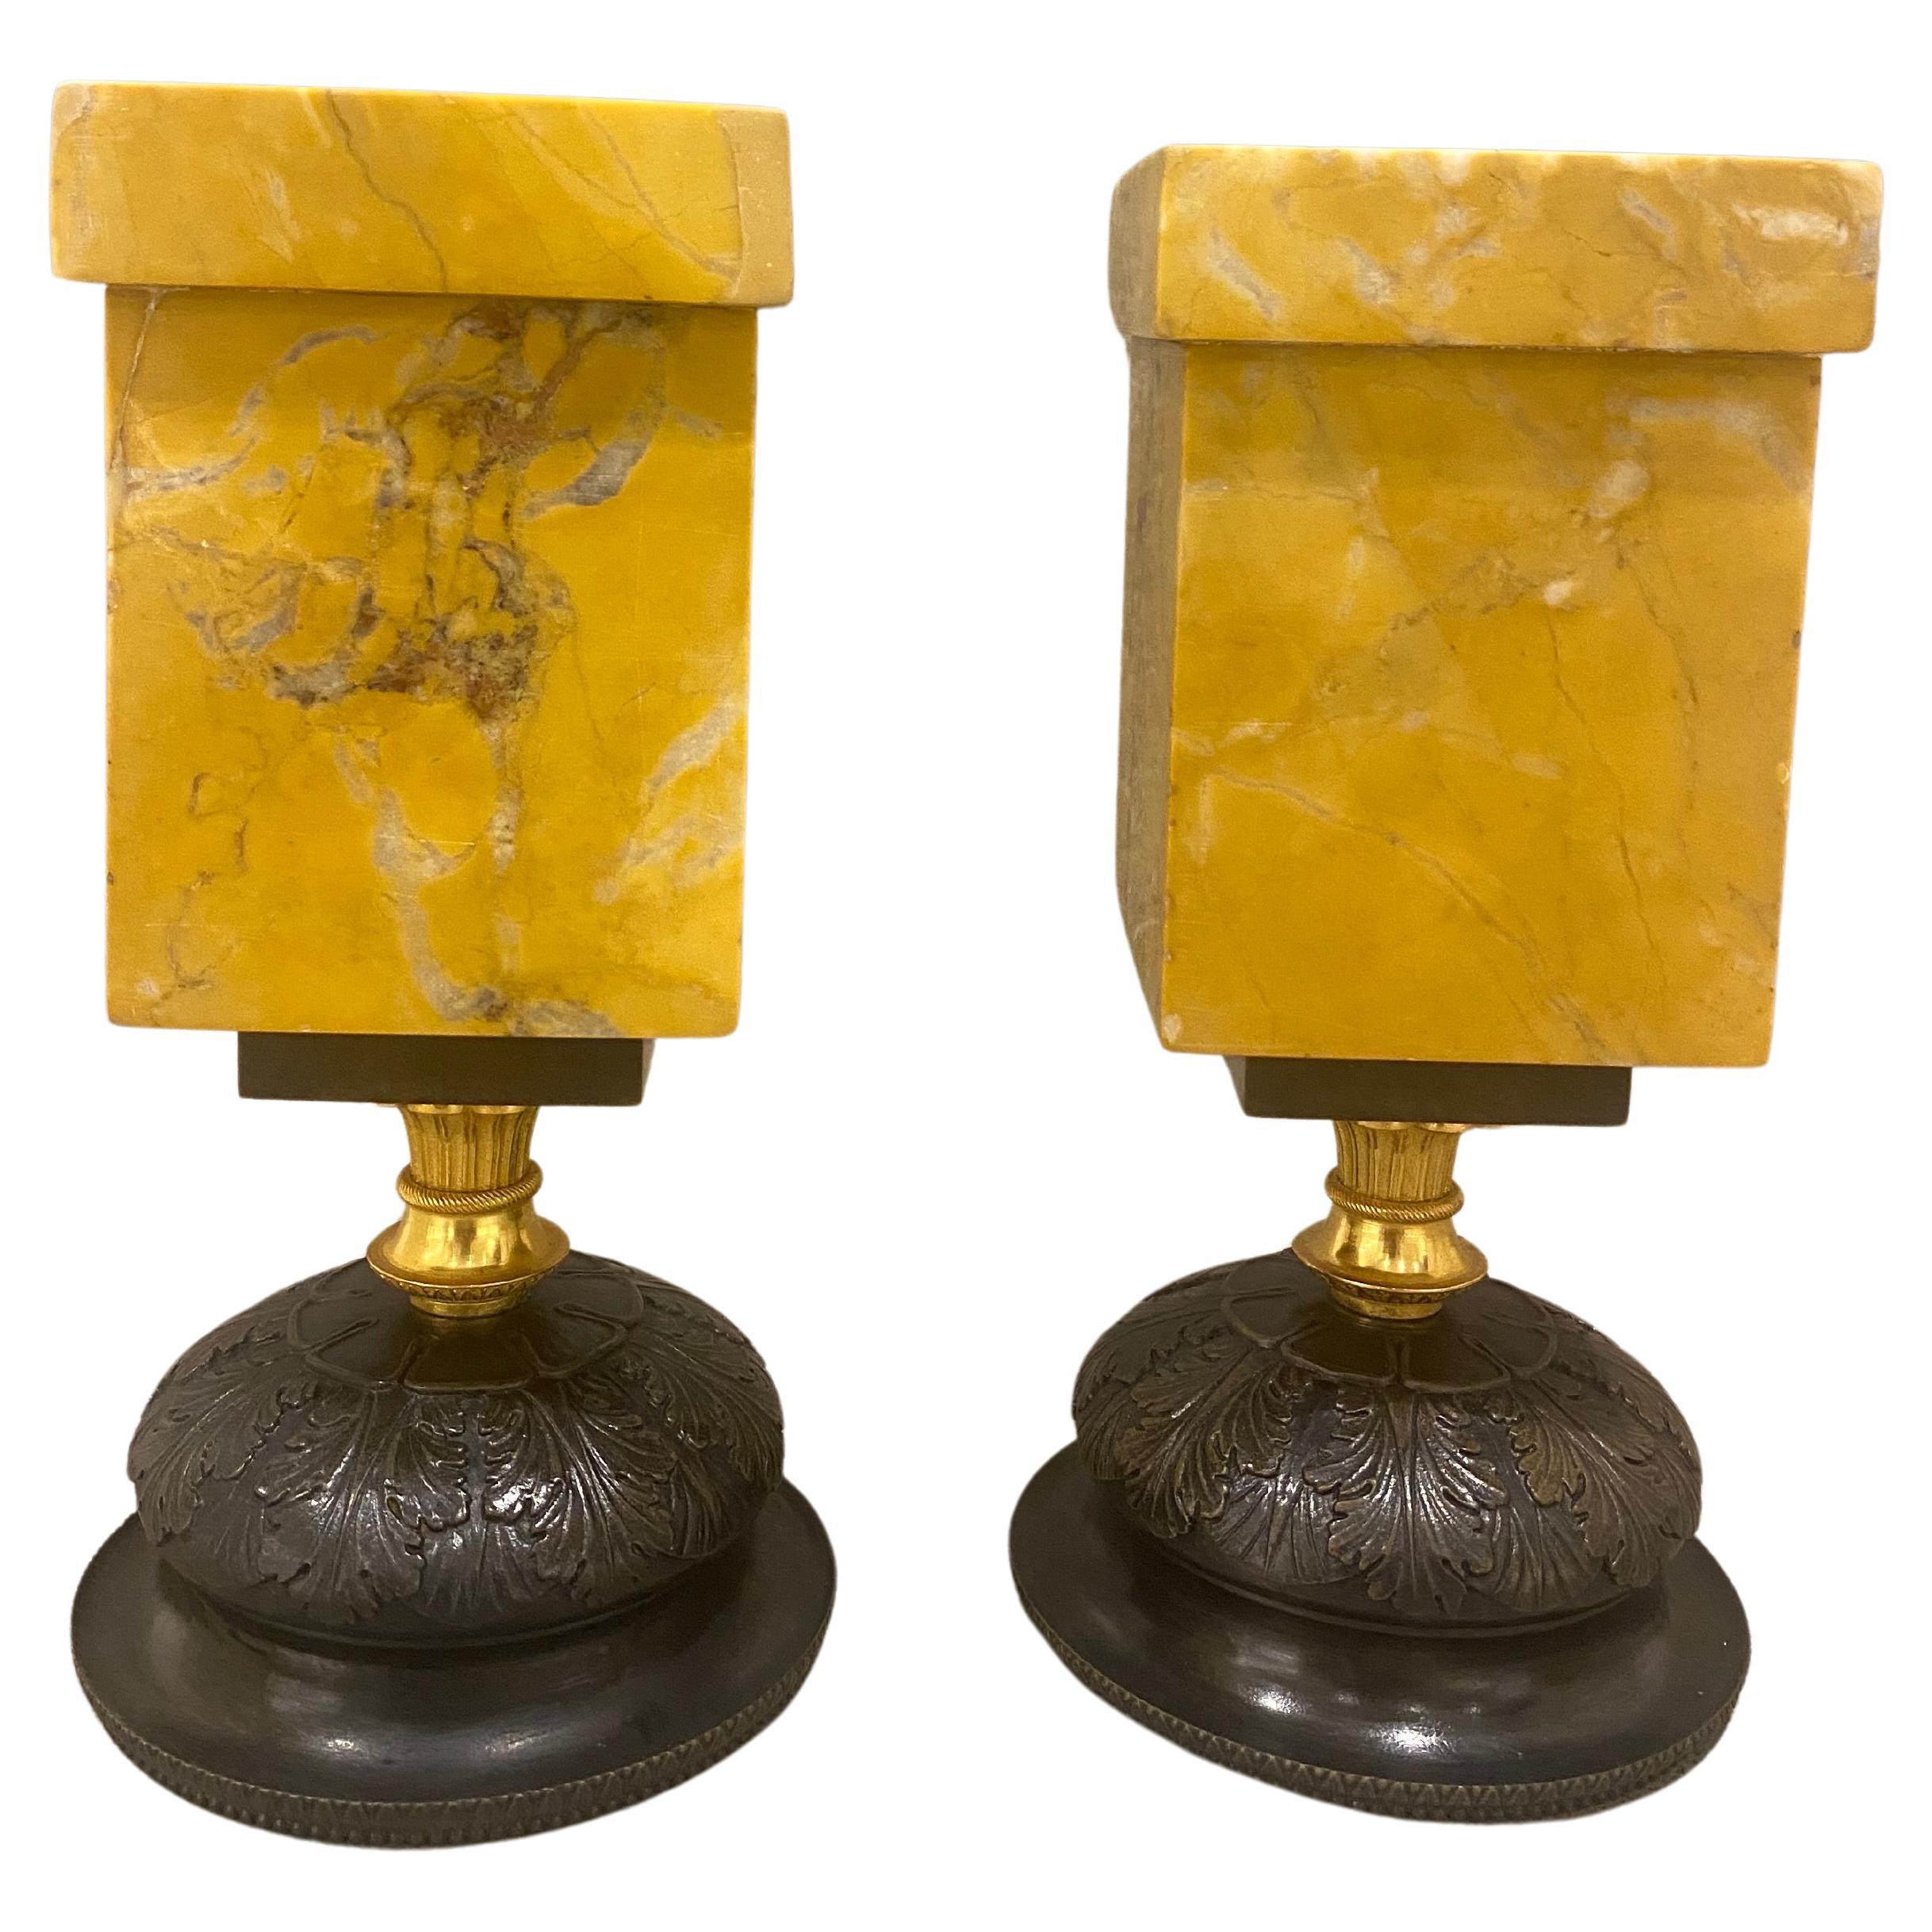 High Quality Pair of Regency Bronze & Sienna Marble Tazza circa 1820's For Sale 1